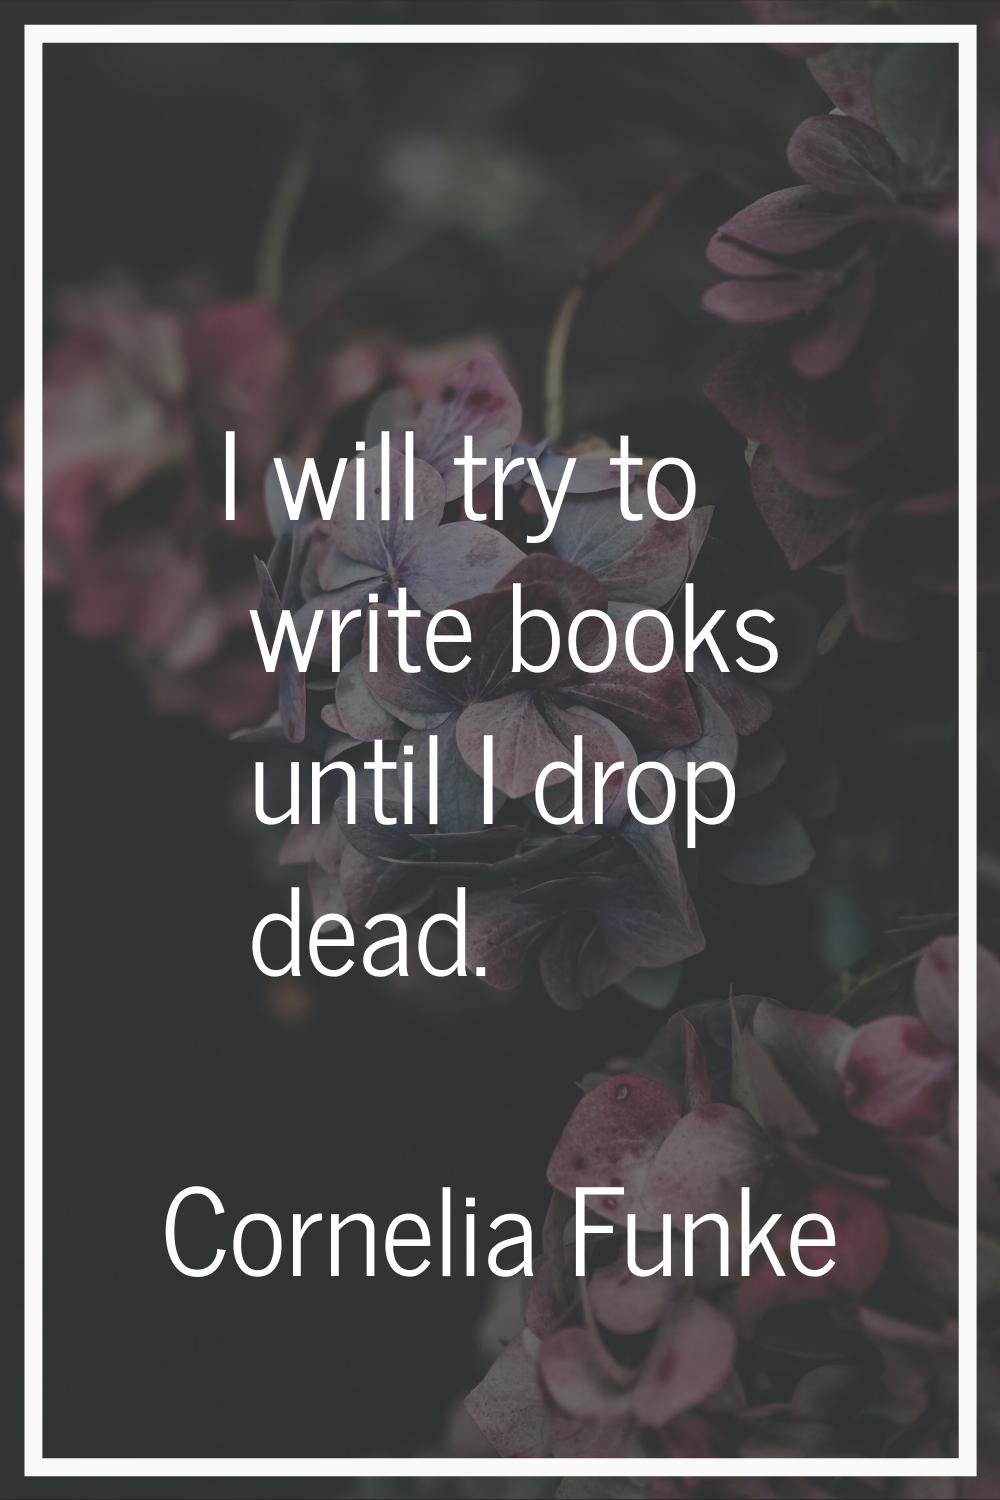 I will try to write books until I drop dead.